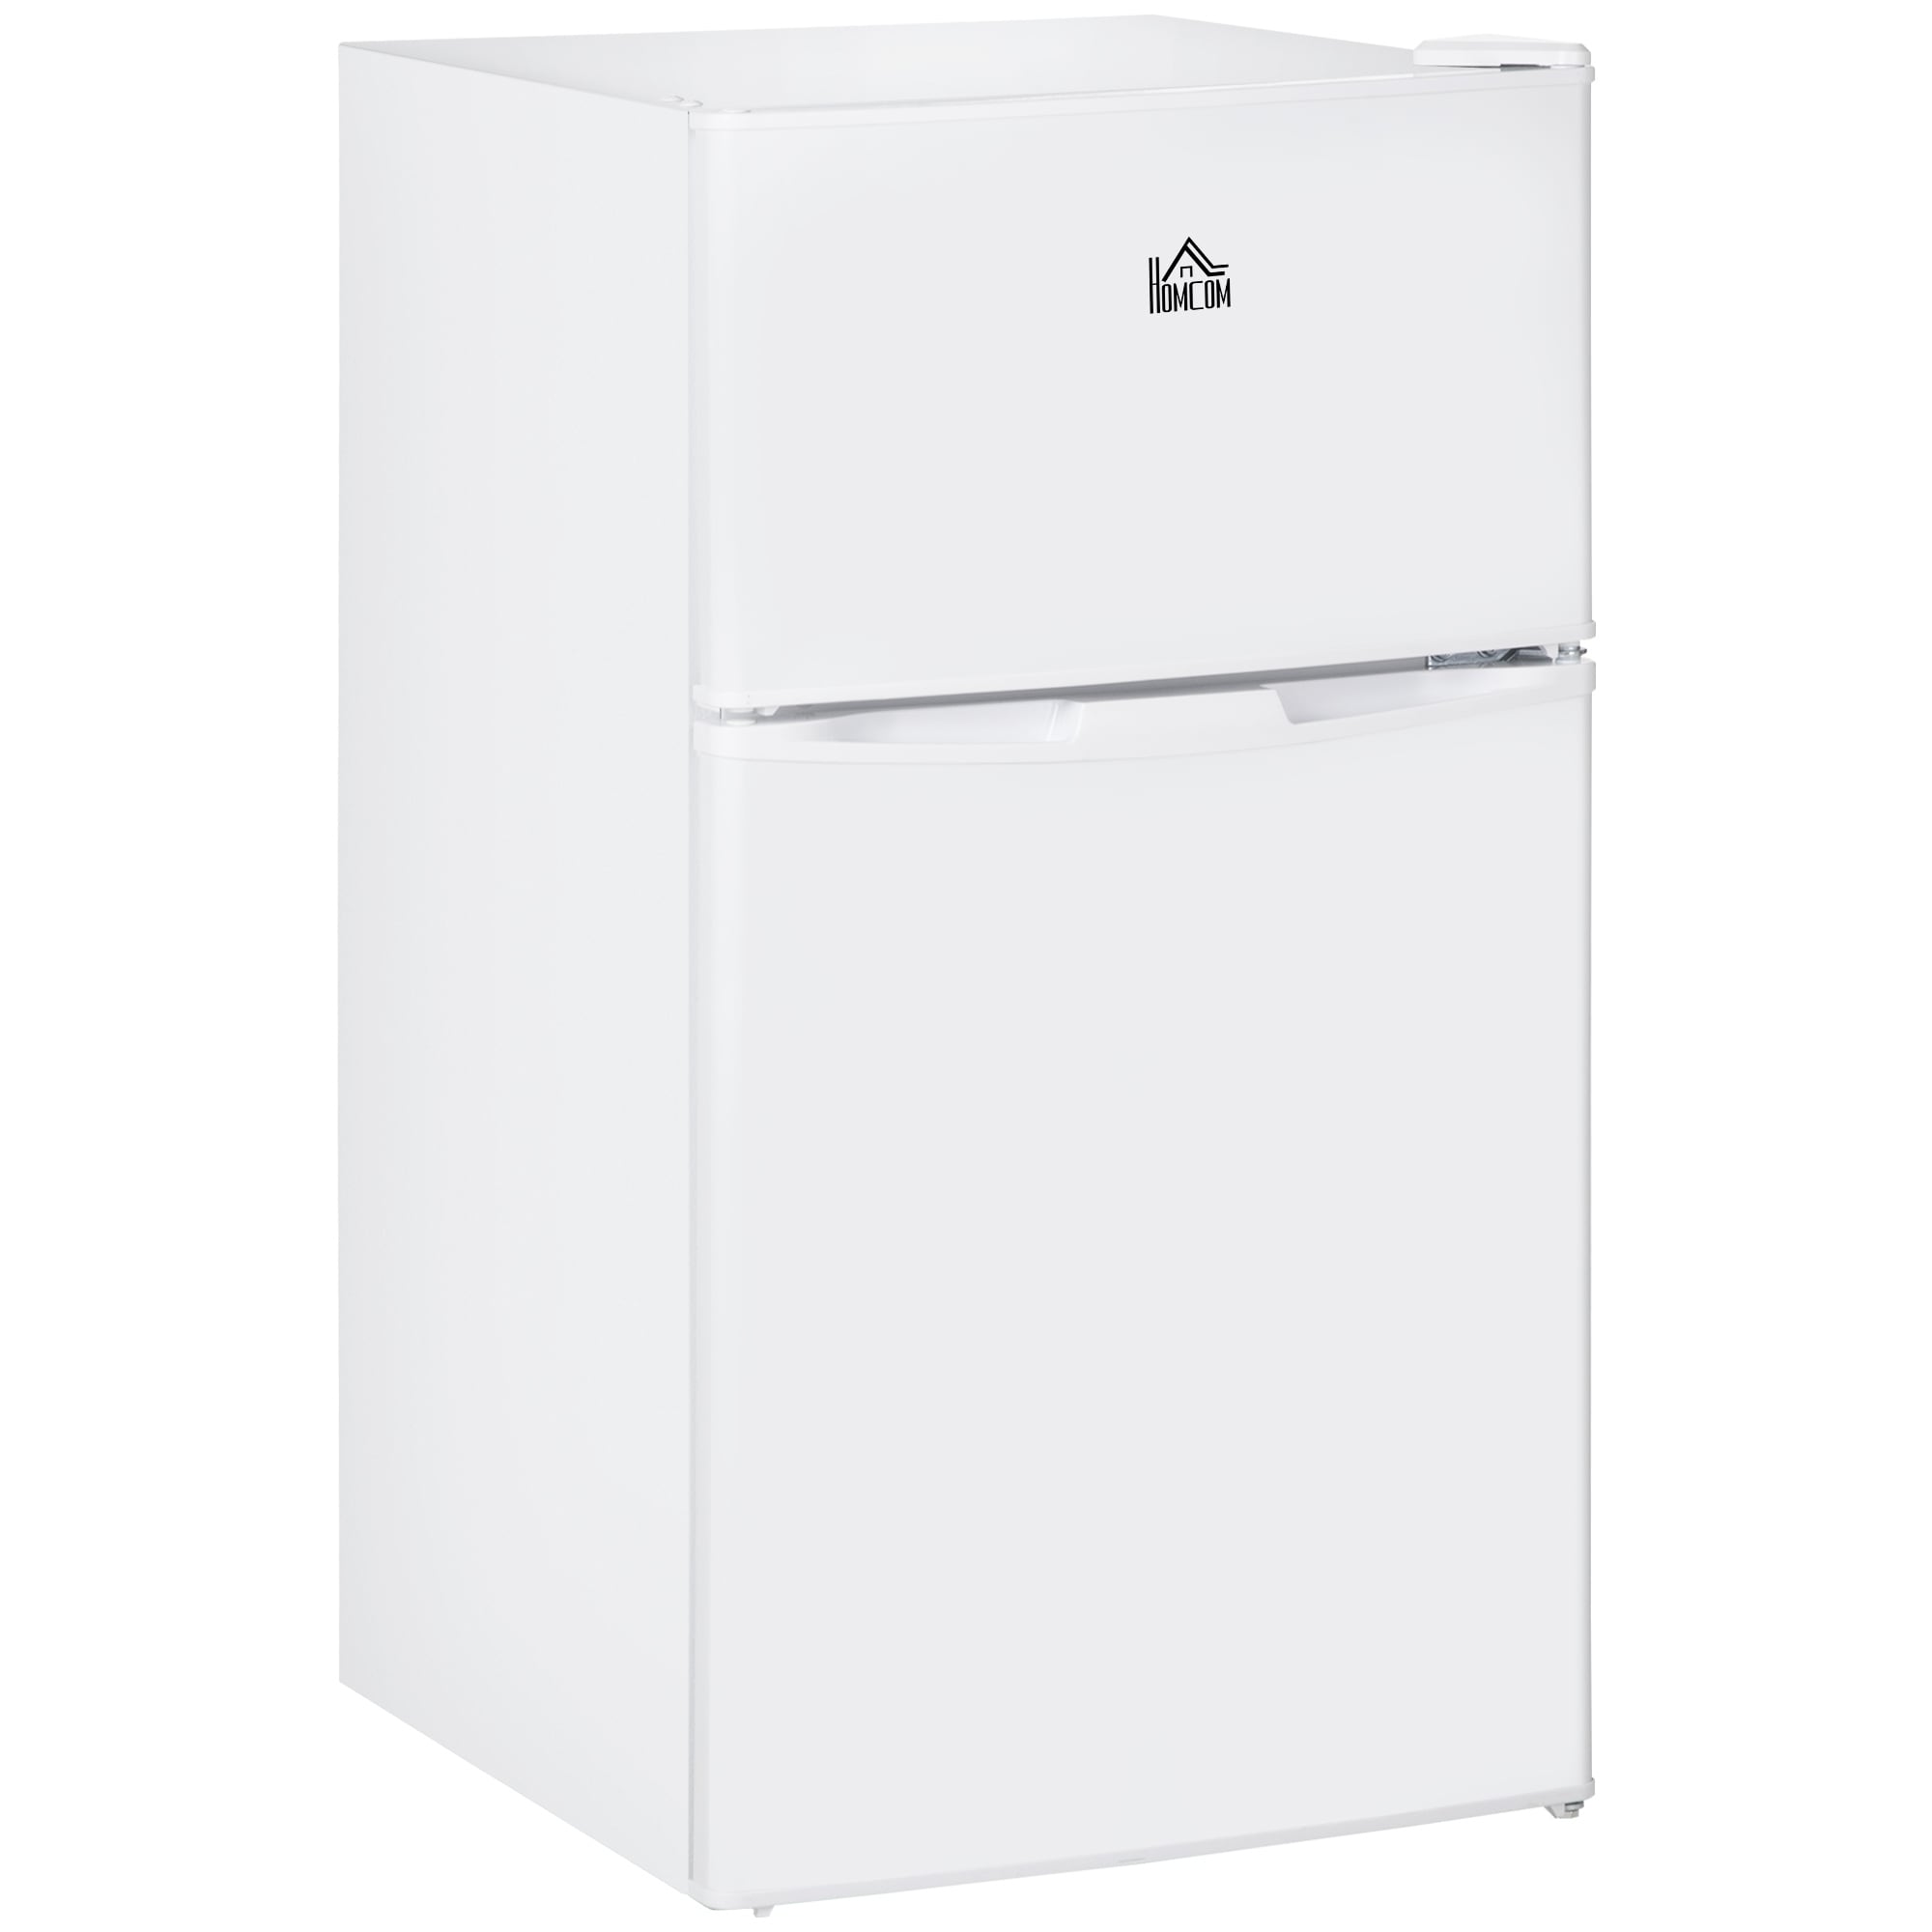 Danby DAR016B1BM 18 Inch Compact All Refrigerator with 1.6 Cu. Ft.  Capacity, Adjustable Wire Rack, Automatic Defrost, and Energy Star Compliant